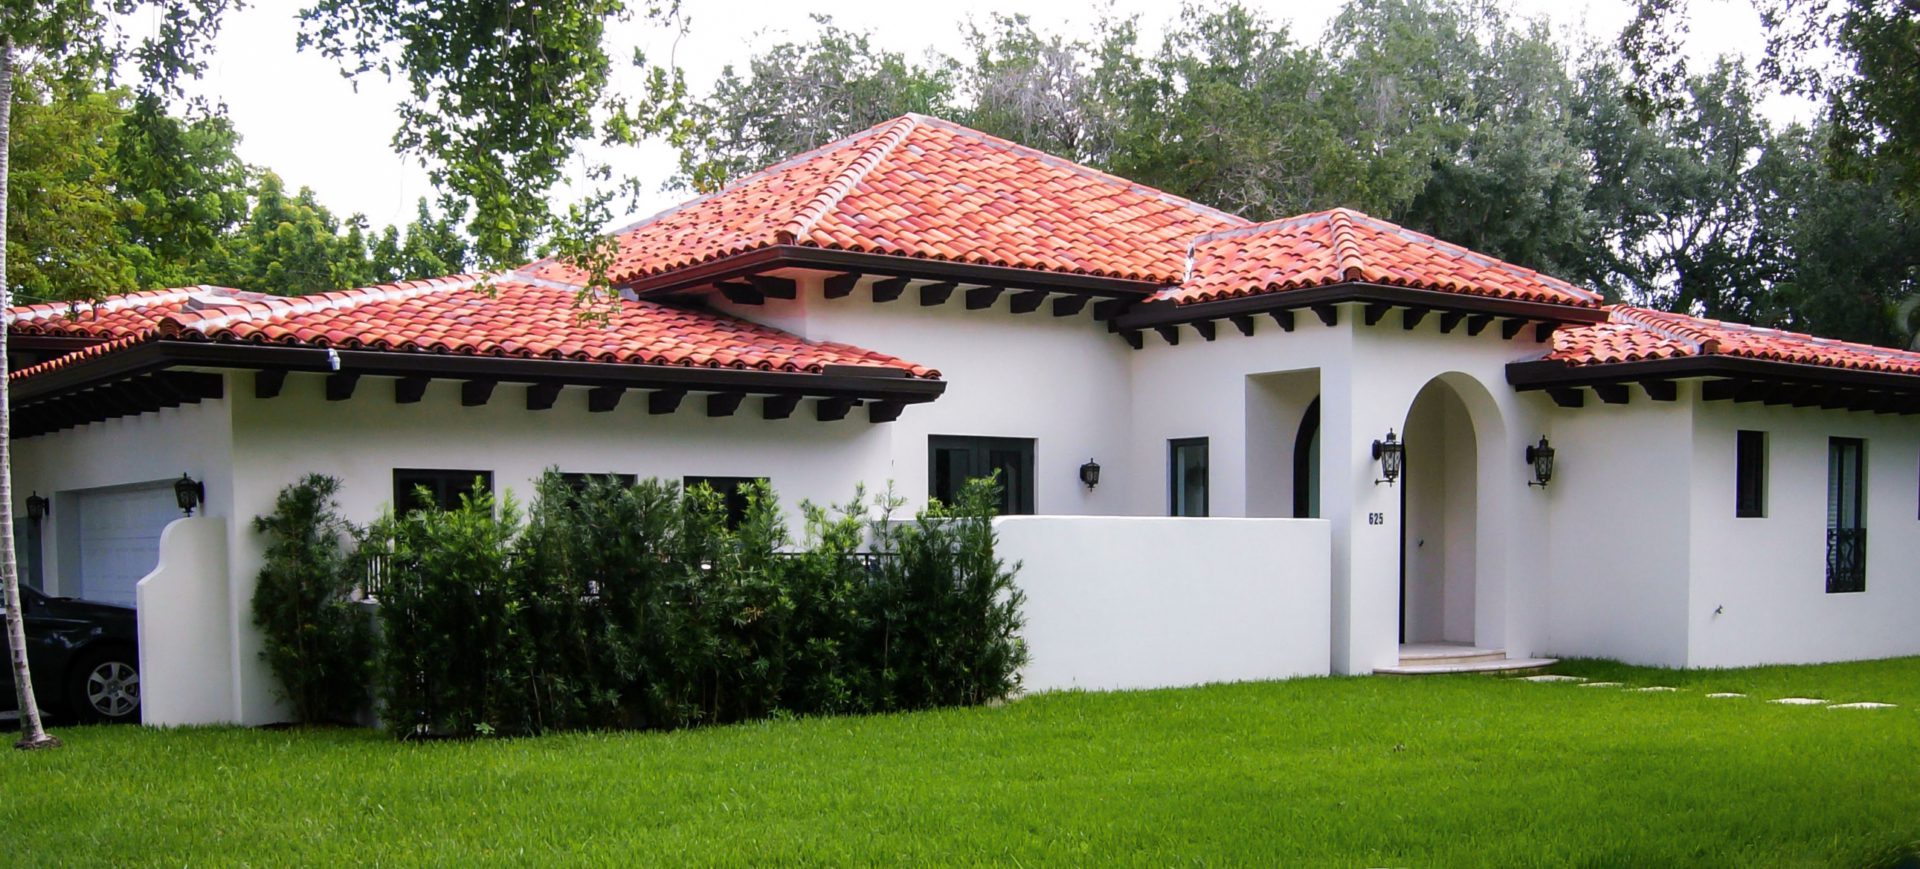 A house with a red tile roof and green grass.